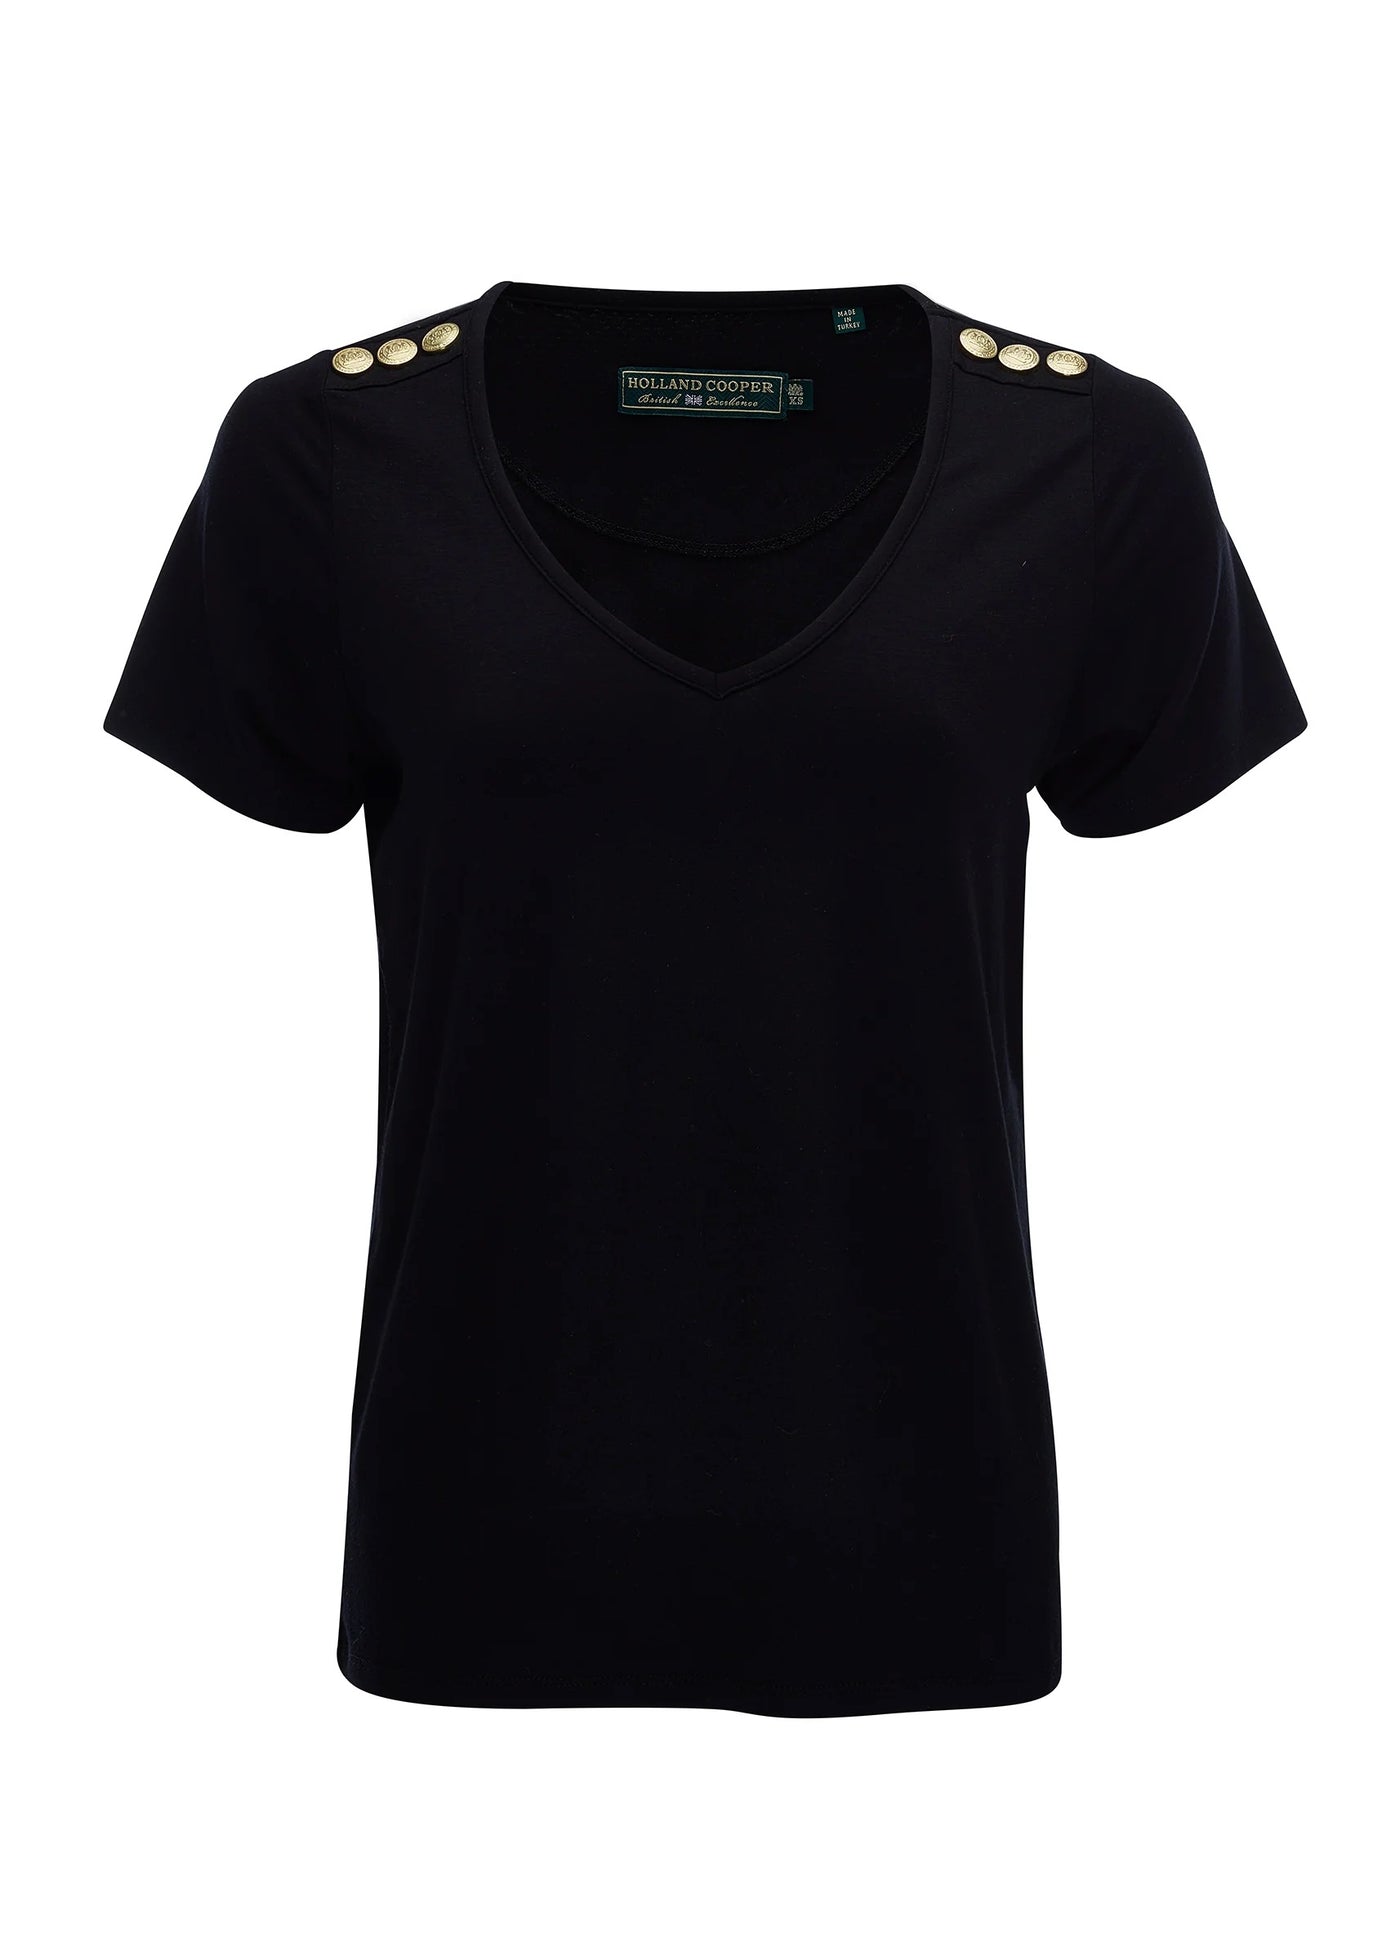 Holland Cooper Relax Fit V Neck Tee in Black Front